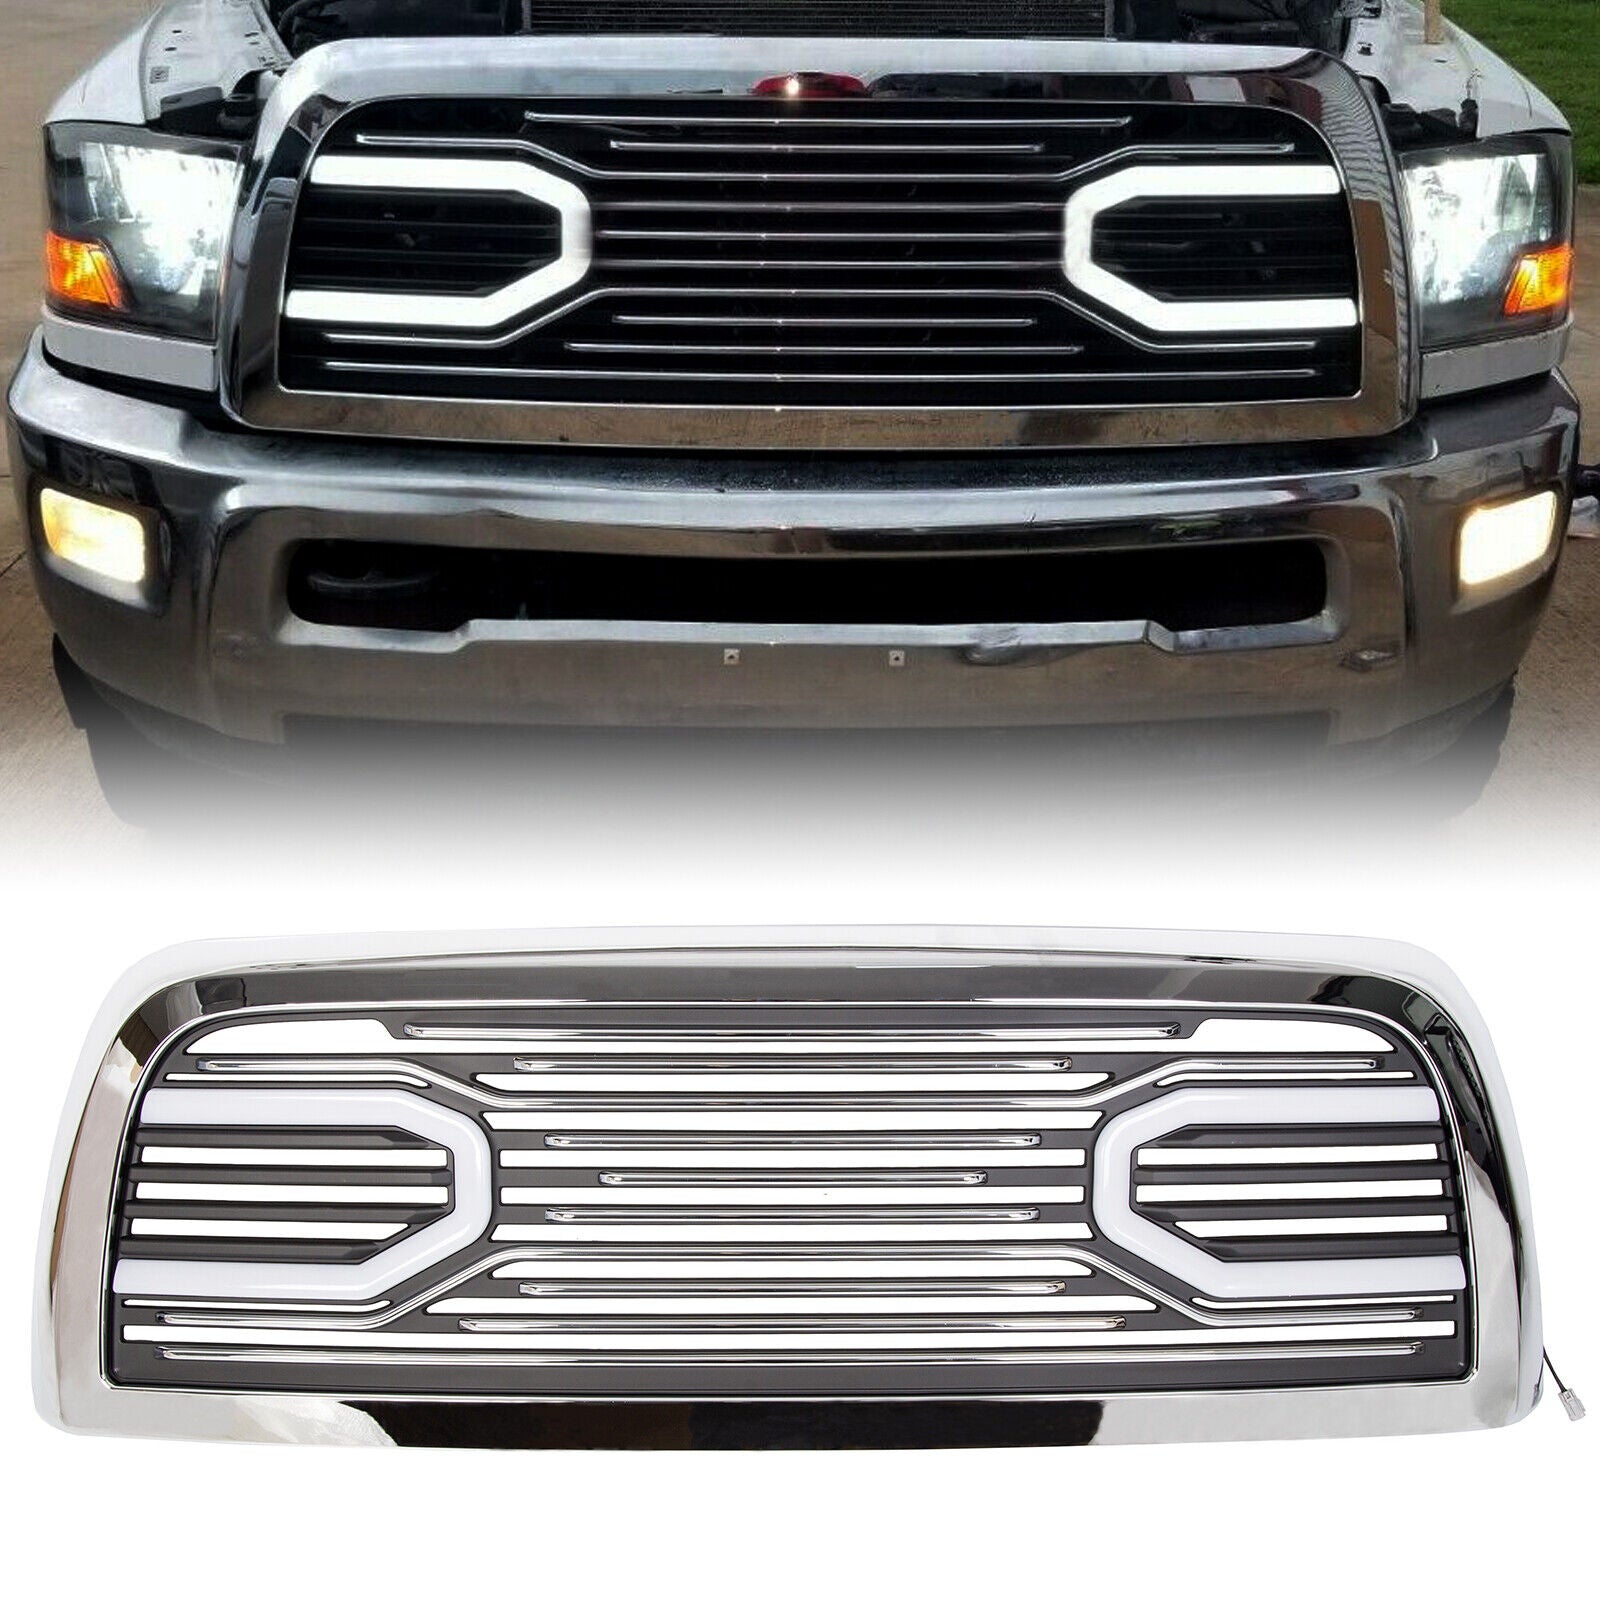 For 2010-2018 Dodge Ram 2500 3500 Big Horn Chrome Grille &Replacement Shell & Lights